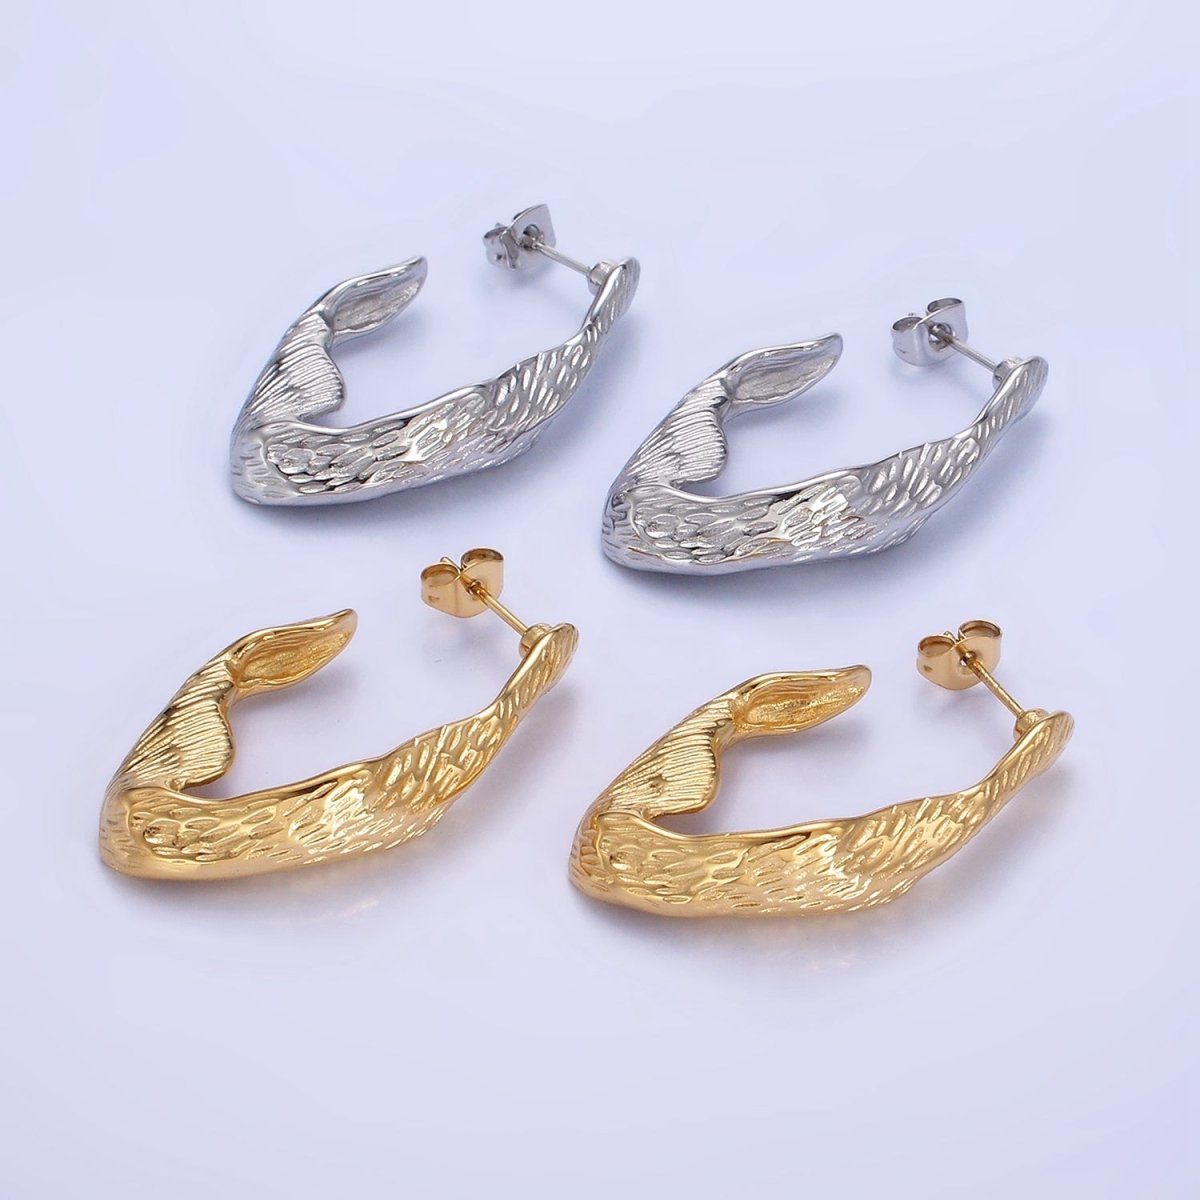 Stainless Steel 35mm Line-Textured Abstract Foil J-Shaped Earrings in Gold & Silver | AB1370 AB1371 - DLUXCA